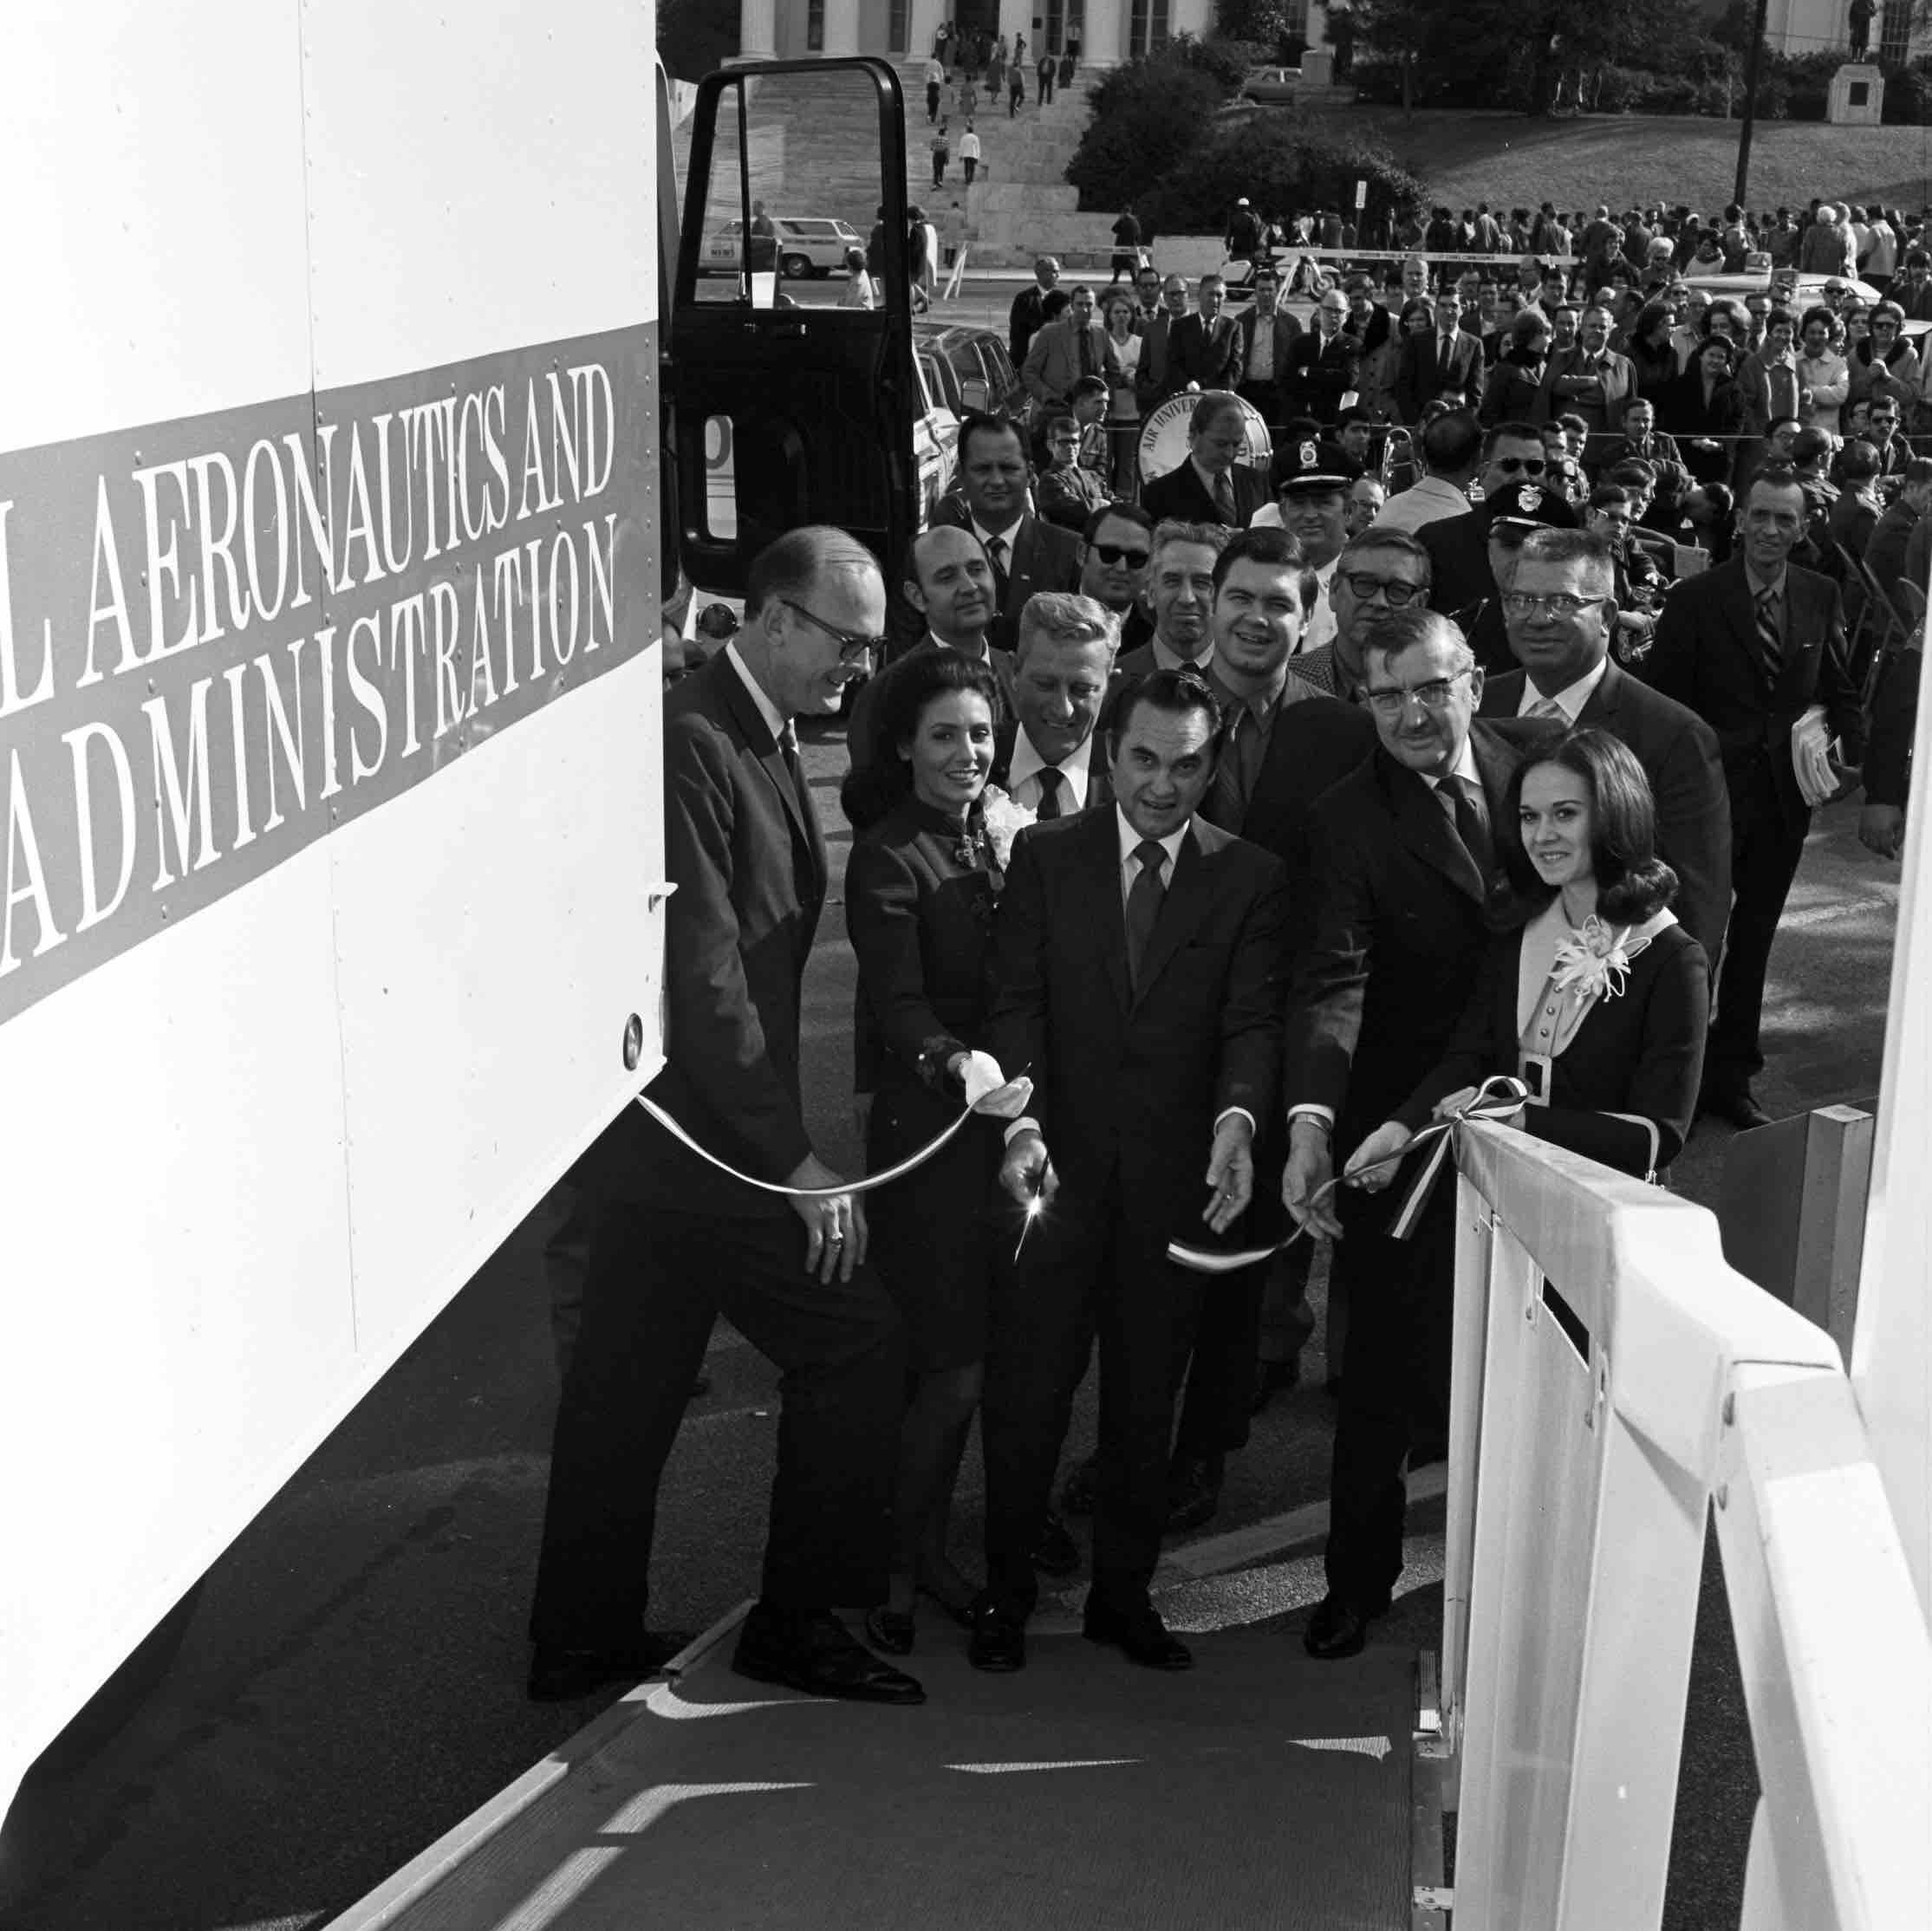 Alabama Governor George Wallace cutting the ribbon on the Apollo 11 Command Module “Columbia” exhibit in Montgomery, Alabama.